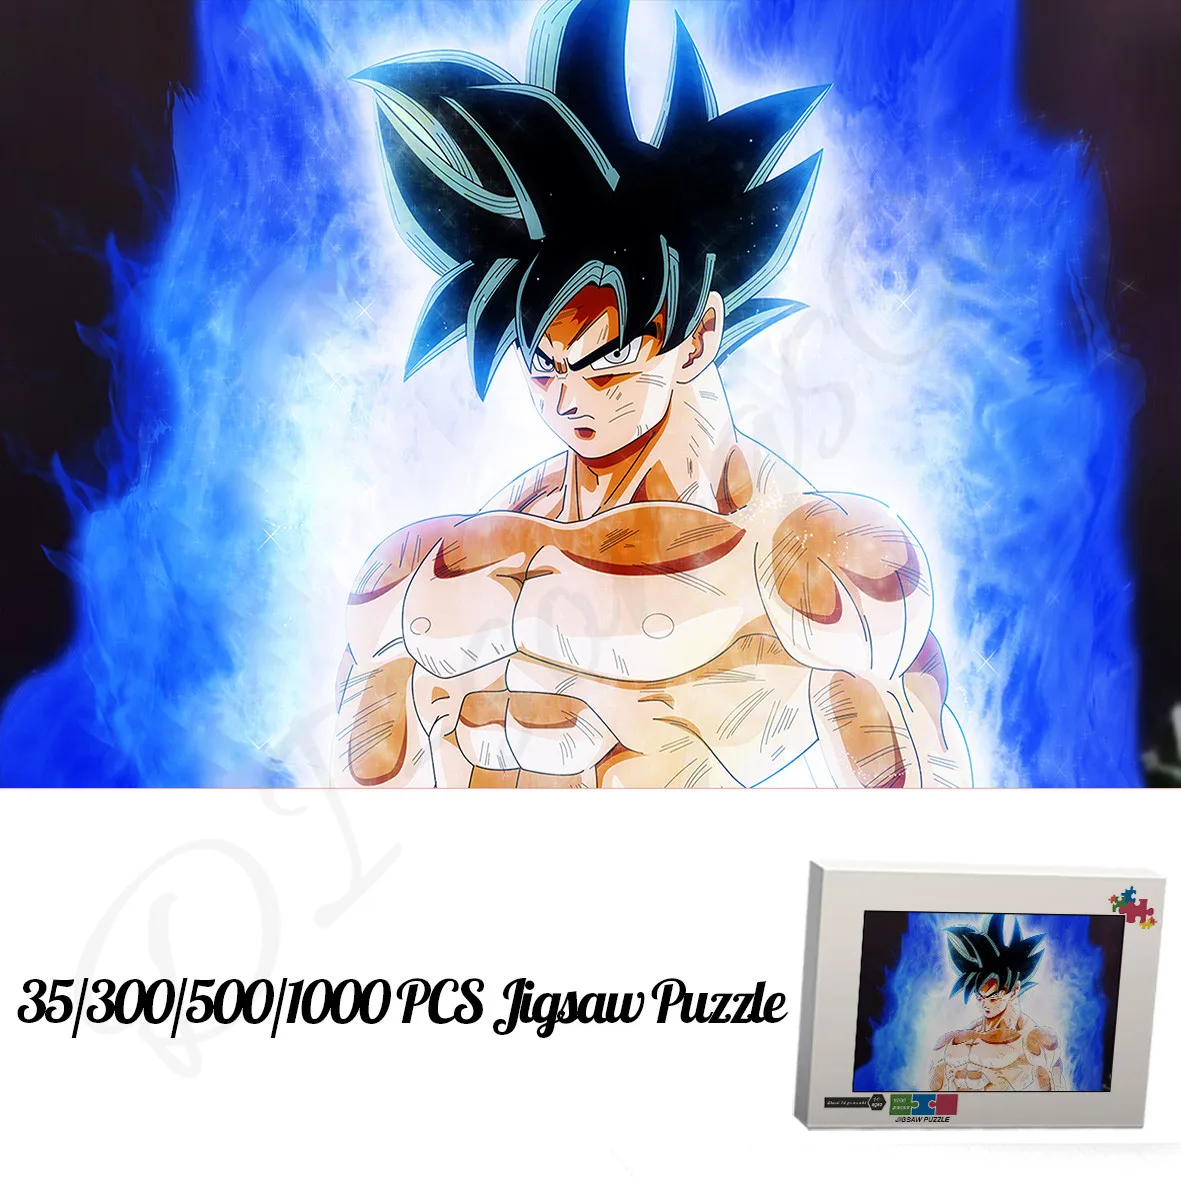 

35 300 500 1000 Pieces Puzzles Goku In The State of Battle Puzzles Bandai Dragon Ball Wooden Jigsaw Puzzles Unique Toys for Kids